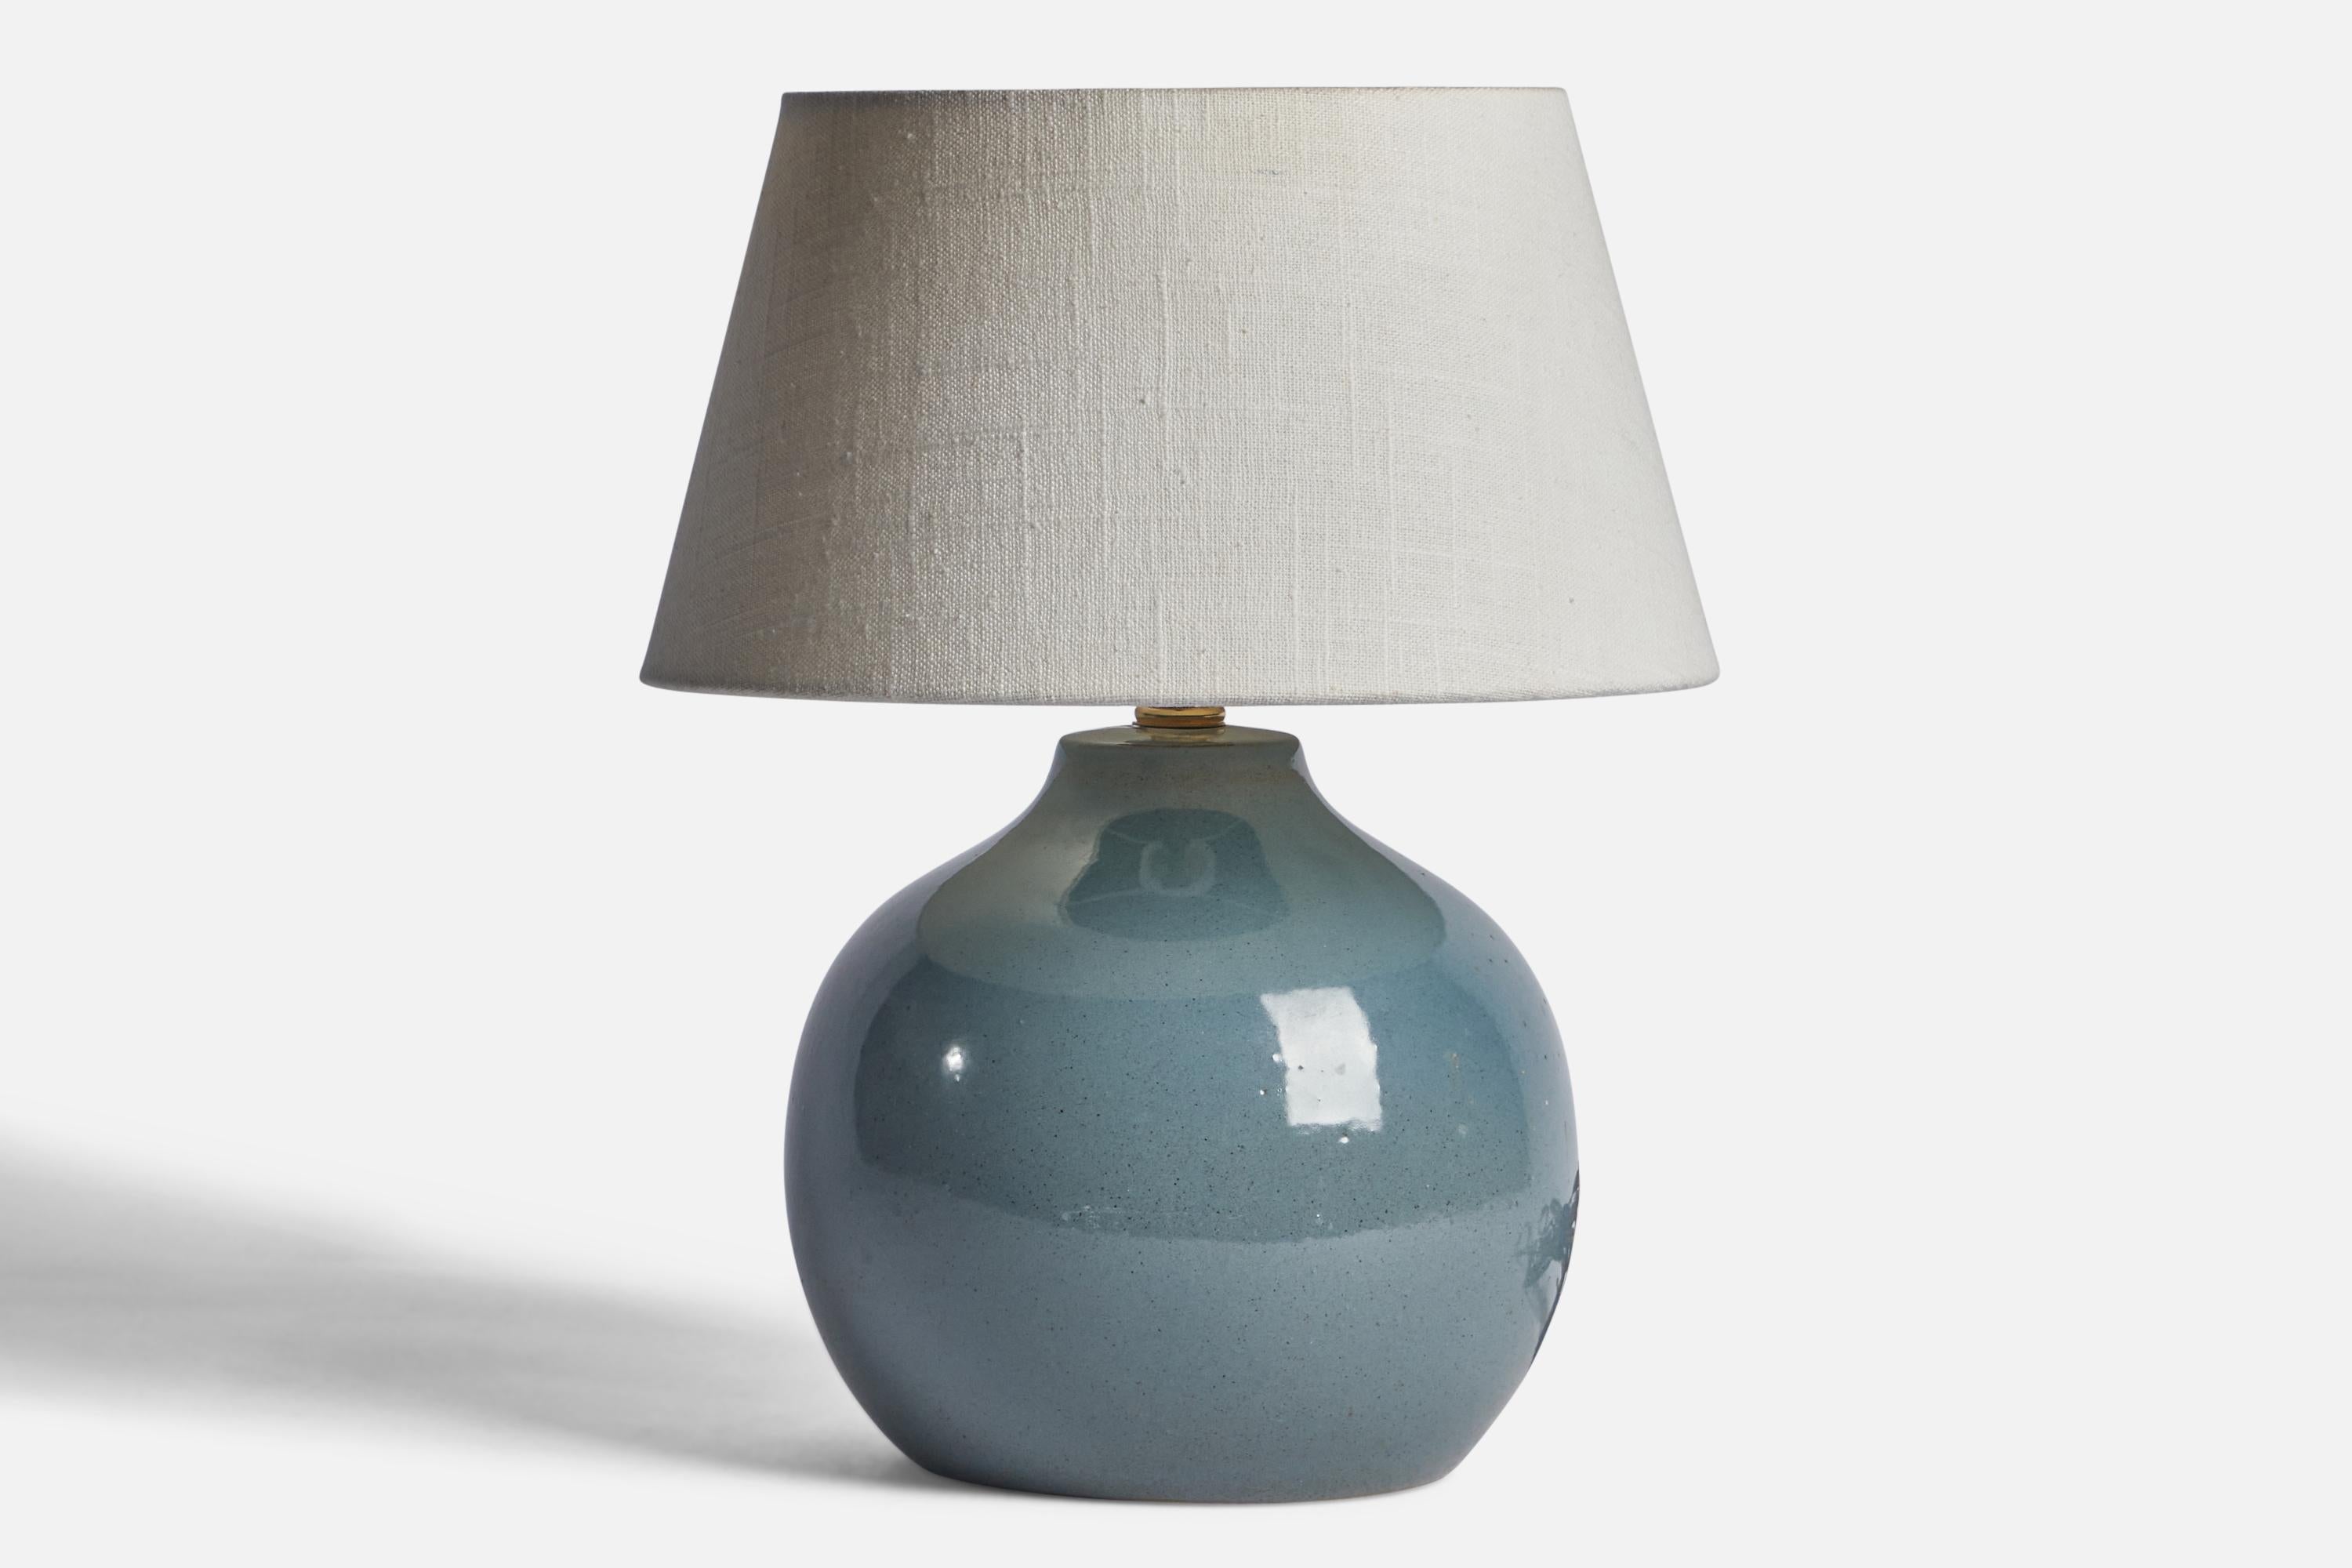 A blue-glazed ceramic table lamp designed by Jane & Gordon Martz and produced by Marshall Studios, USA, 1960s.

Dimensions of Lamp (inches): 9.75” H x 4.15” Diameter
Dimensions of Shade (inches): 7” Top Diameter x 10” Bottom Diameter x 5.5” H